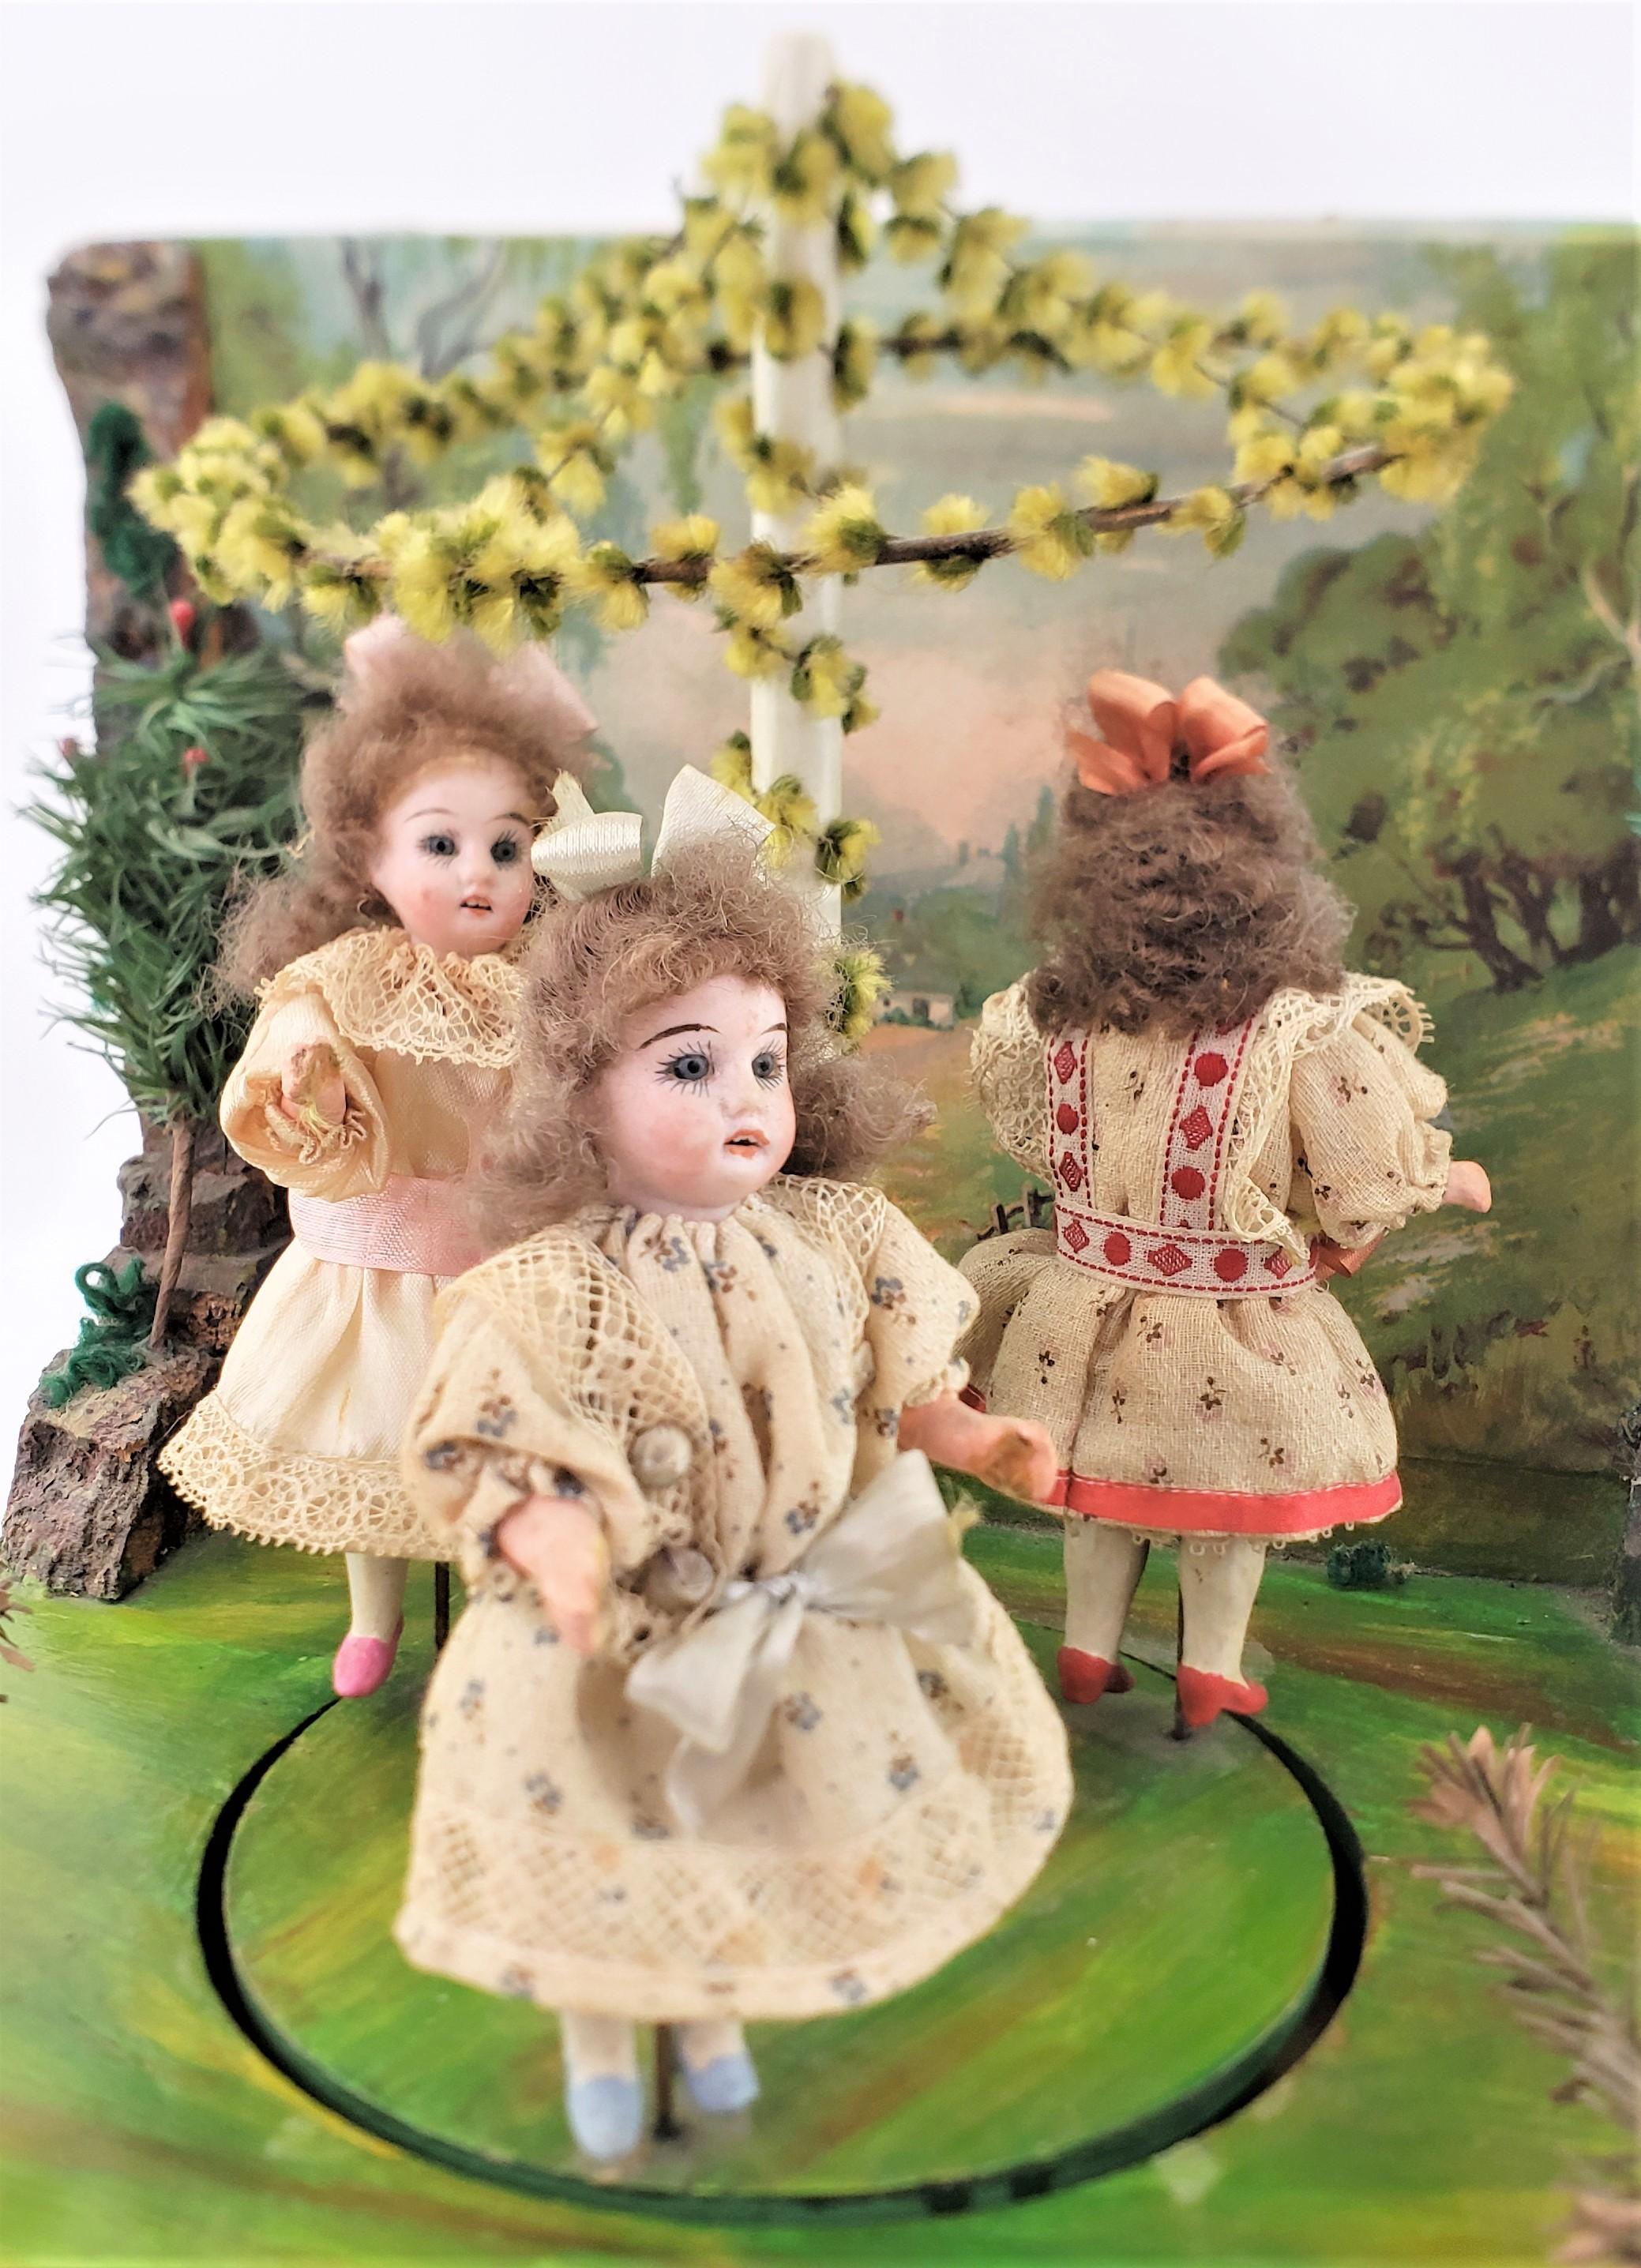 Antique German Toy Automaton Music Box with Girls Dancing Around the Maypole 2